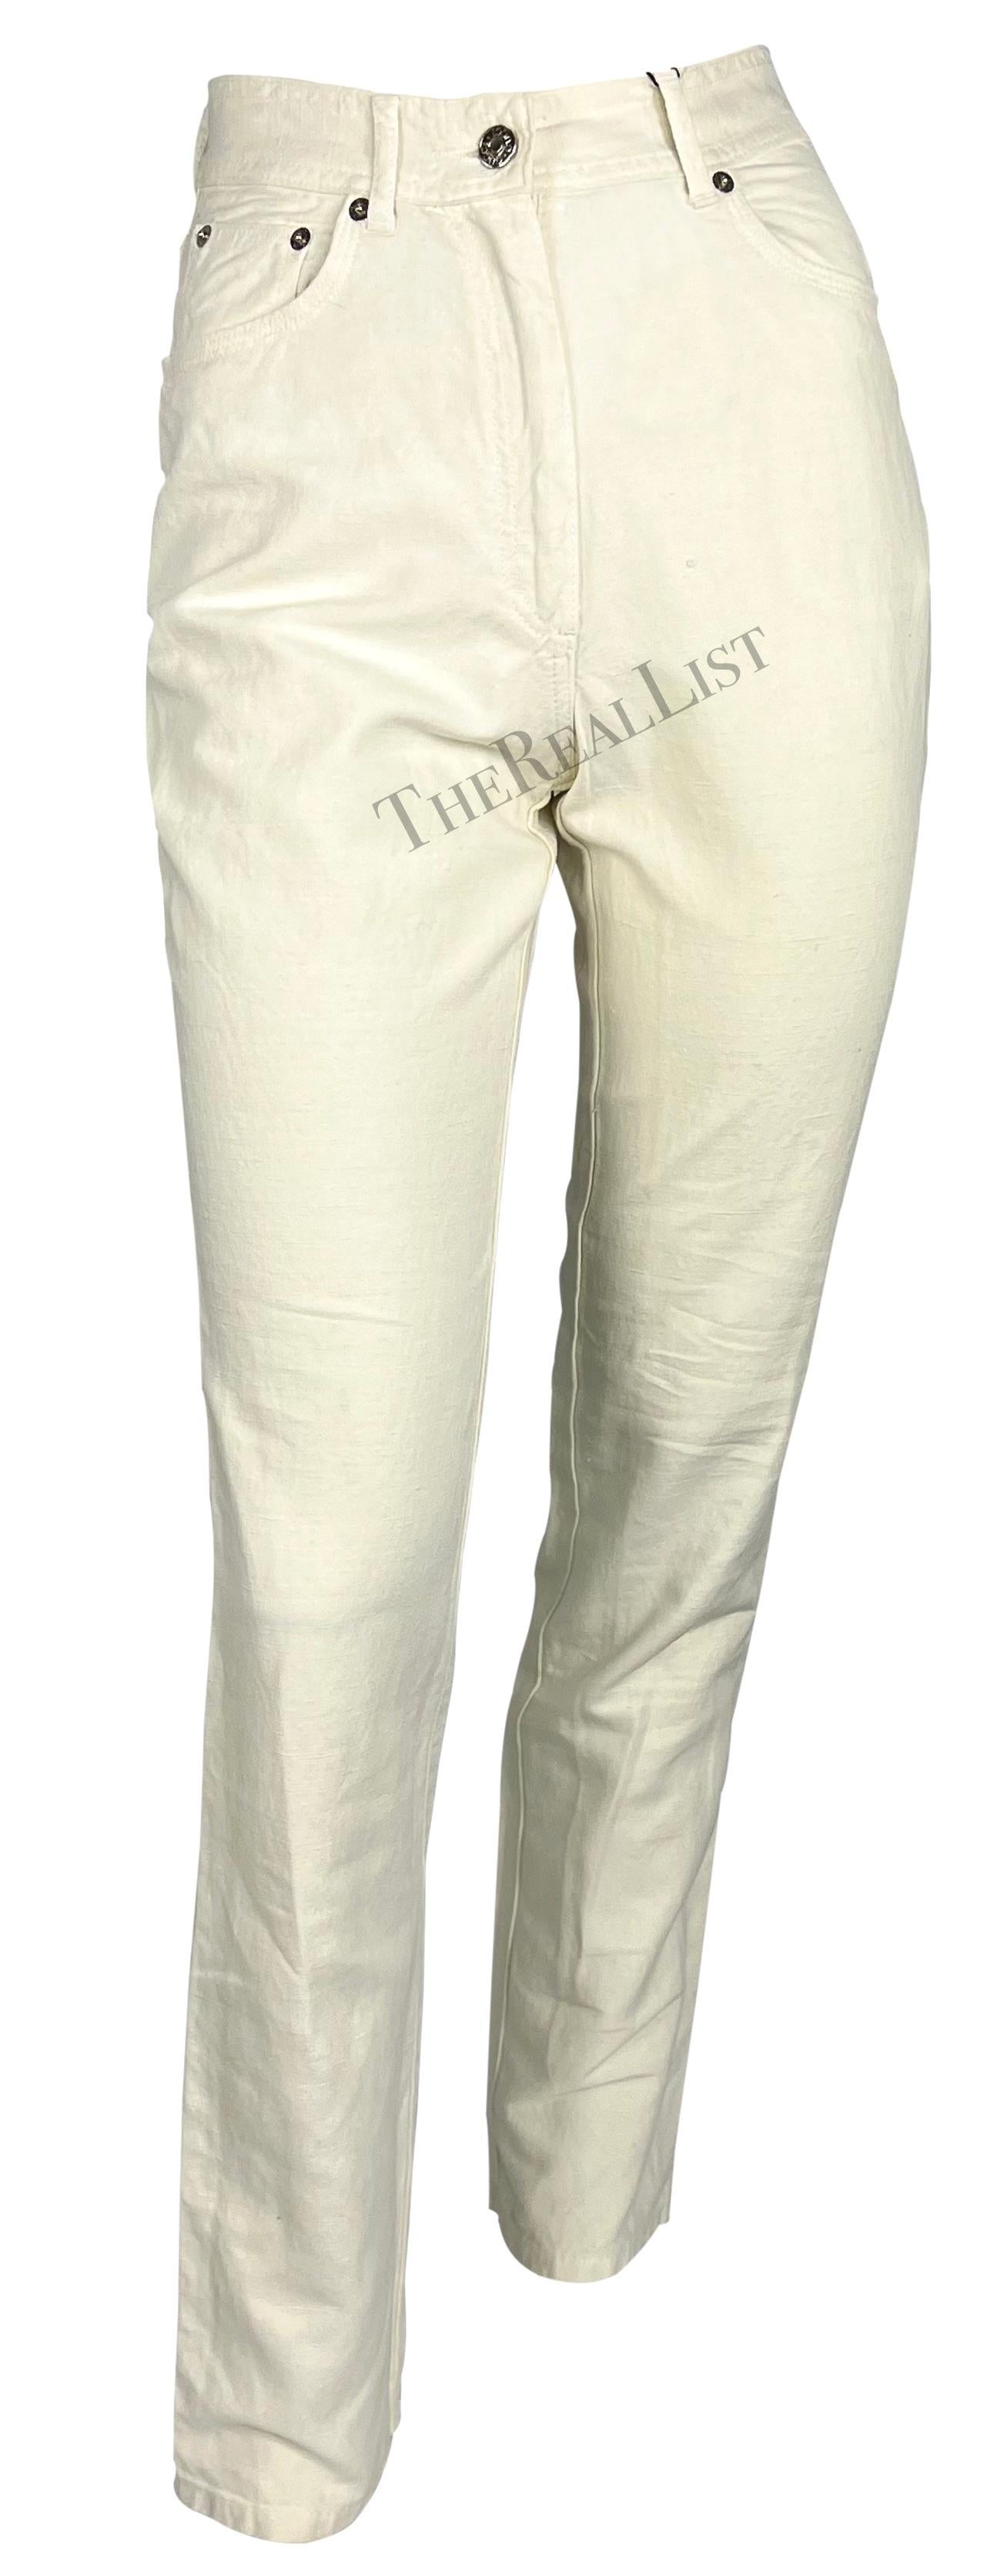 NWT S/S 1995 Gucci by Tom Ford GG Cream Cotton Linen Jeans For Sale 2